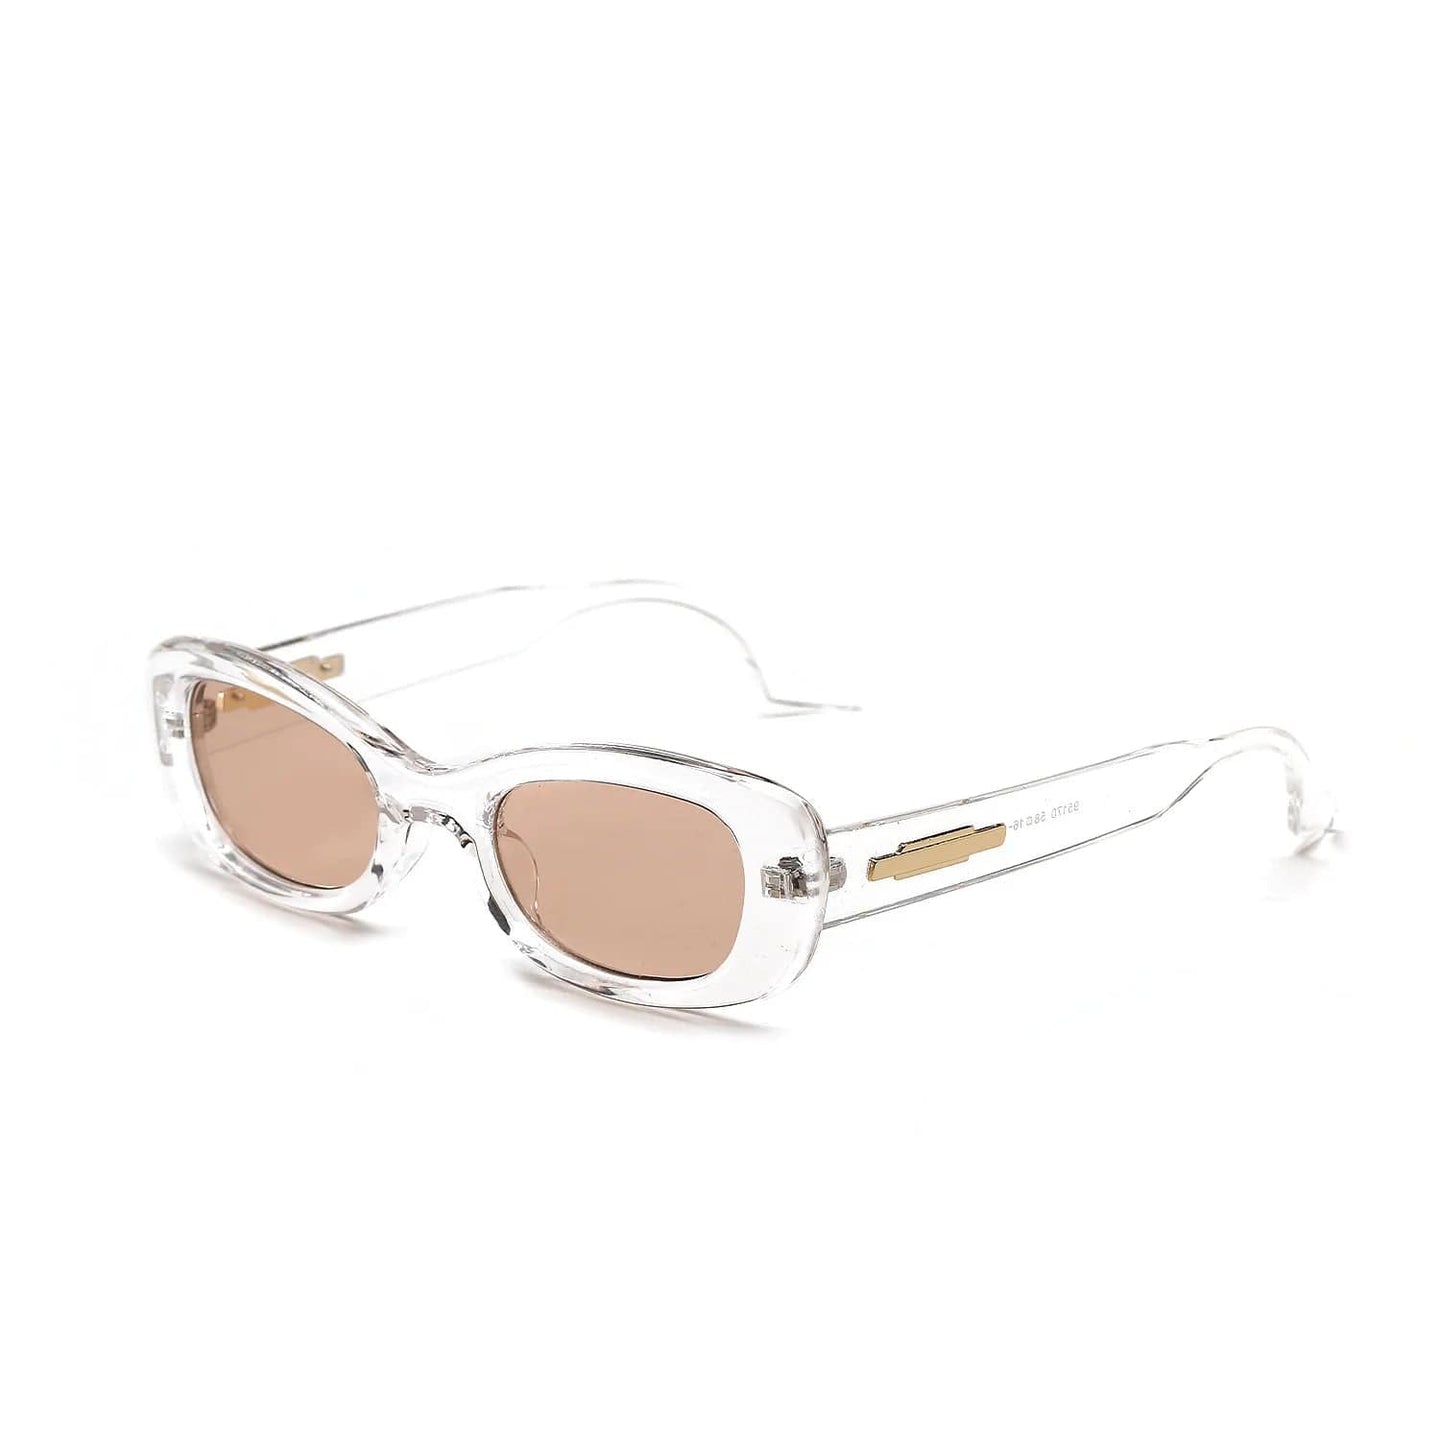 Oval Sunglasses - Retro Small Sun Glasses for Women with Candy-Colored Lenses